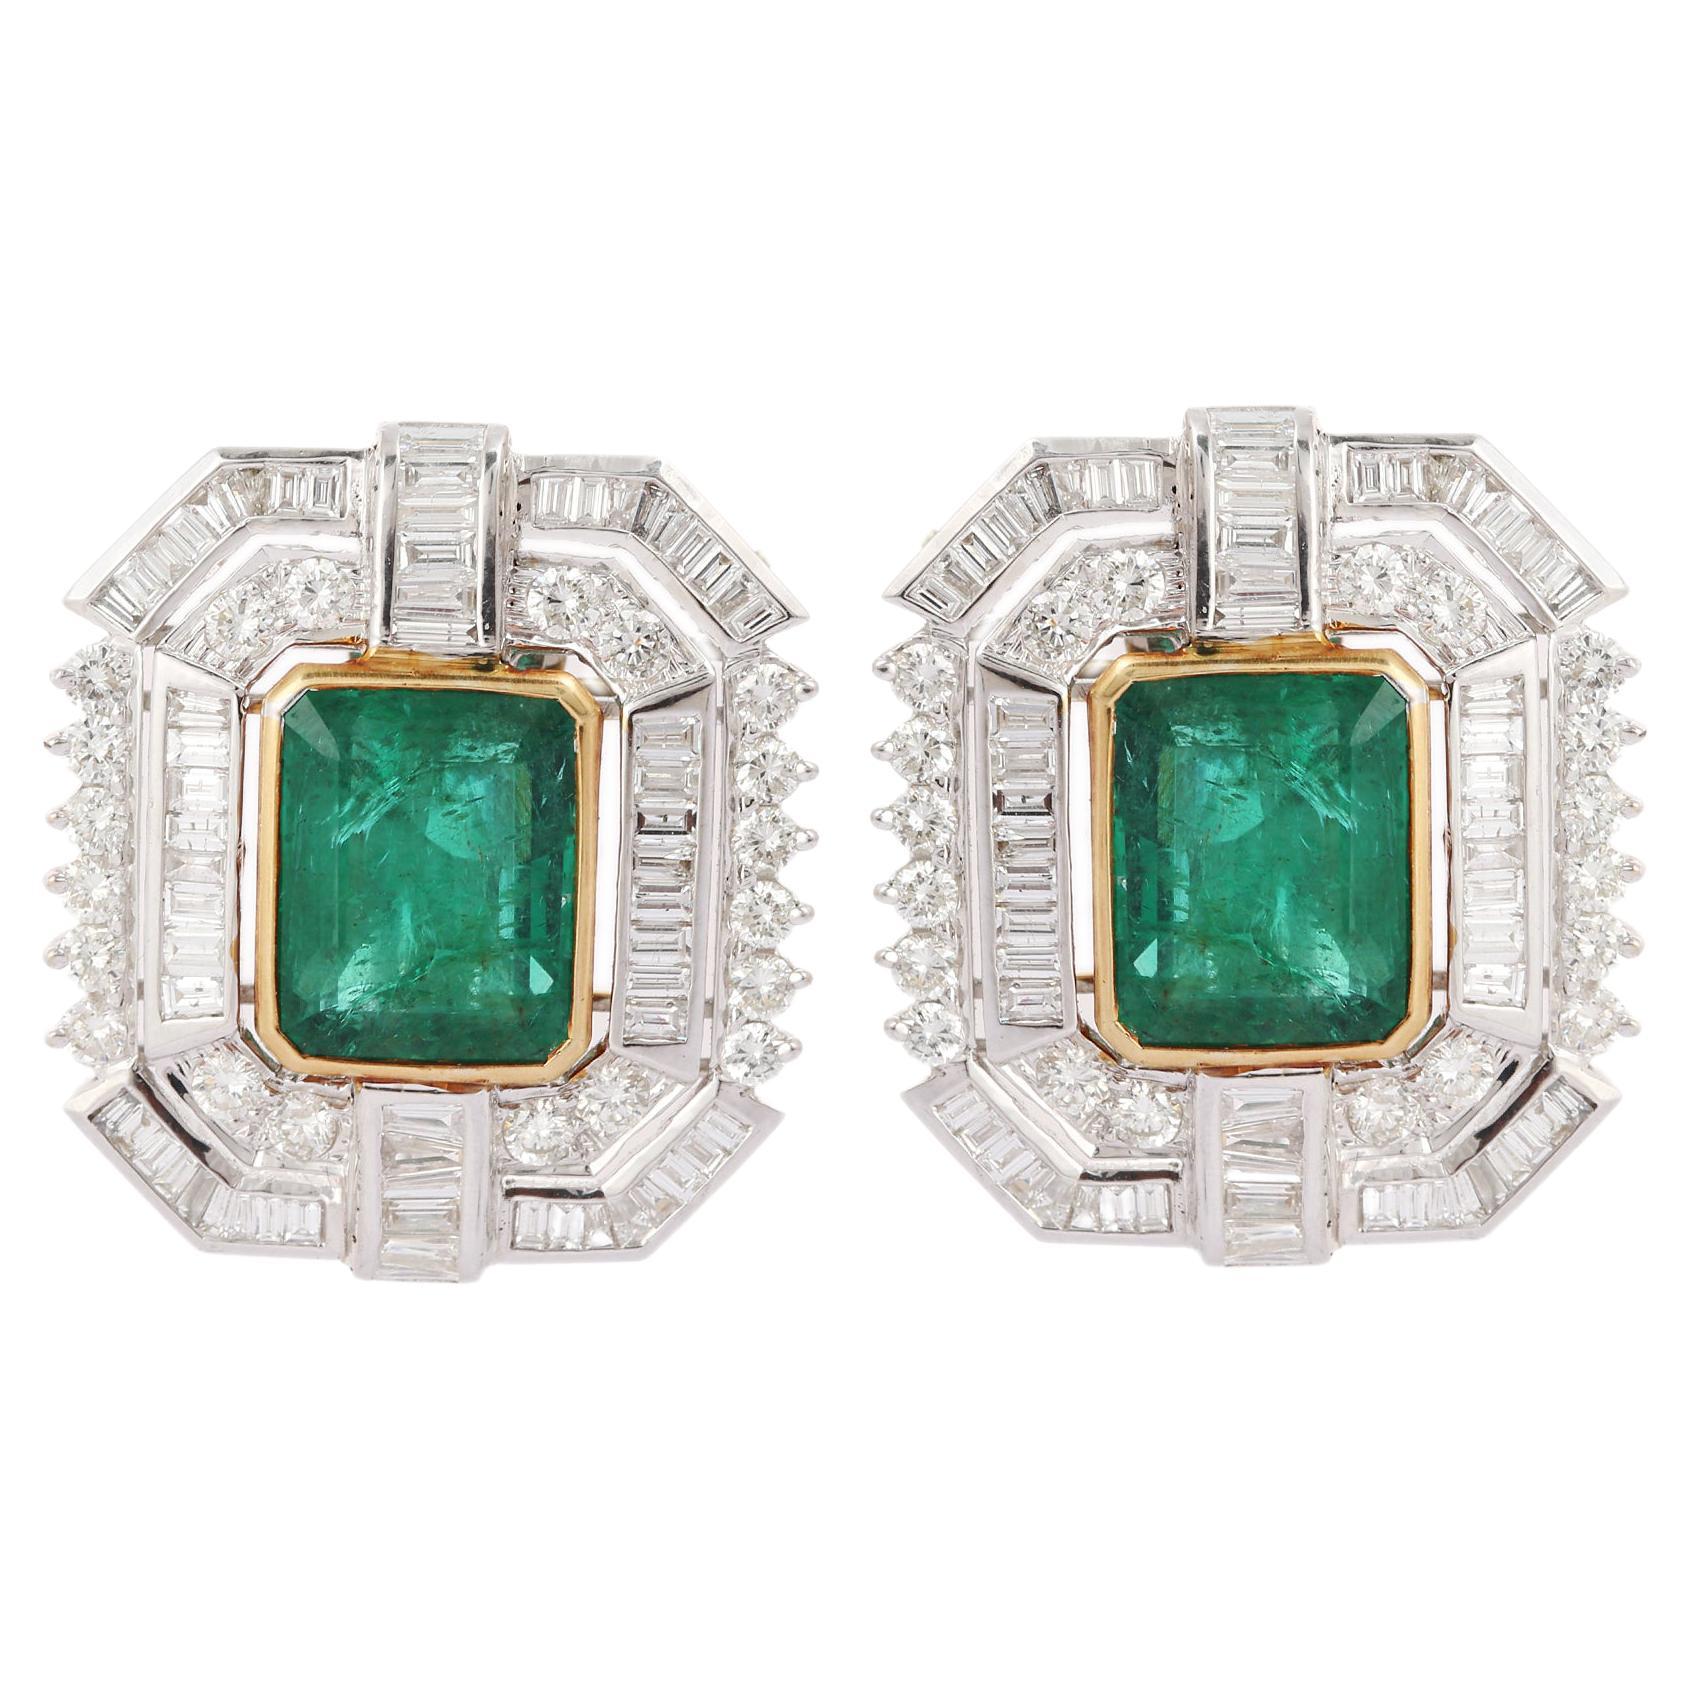 9.7 Carat Emerald Stud Earrings with Diamonds in 18K White Gold For Sale